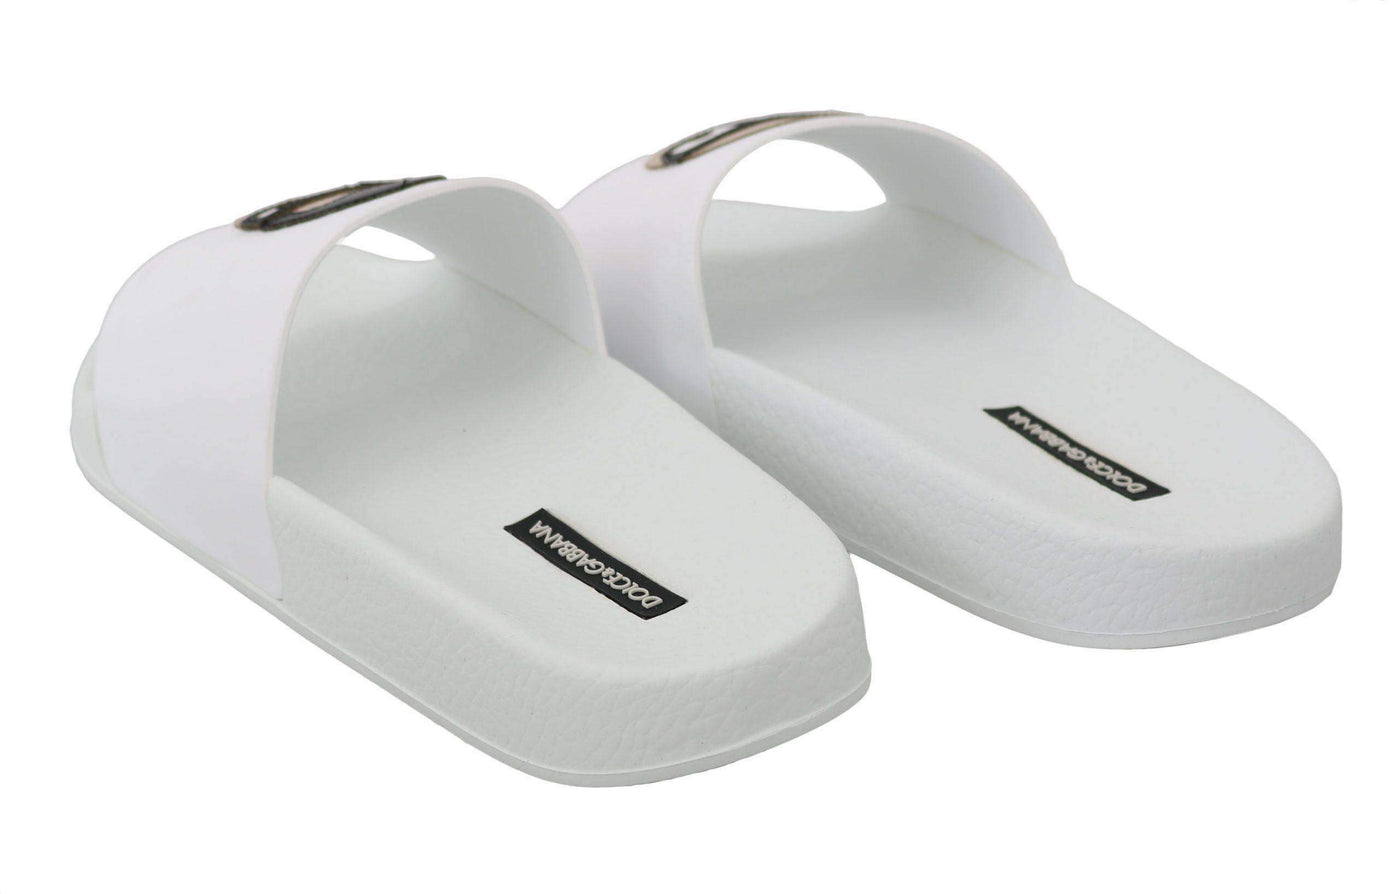 Dolce & Gabbana  White Leather #dgfamily Slides Shoes Sandals #women, Brand_Dolce & Gabbana, Catch, Category_Shoes, Dolce & Gabbana, EU35/US4.5, EU36/US5.5, feed-agegroup-adult, feed-color-white, feed-gender-female, feed-size-US4.5, Flat Shoes - Women - Shoes, Gender_Women, Kogan, Shoes - New Arrivals, White at SEYMAYKA